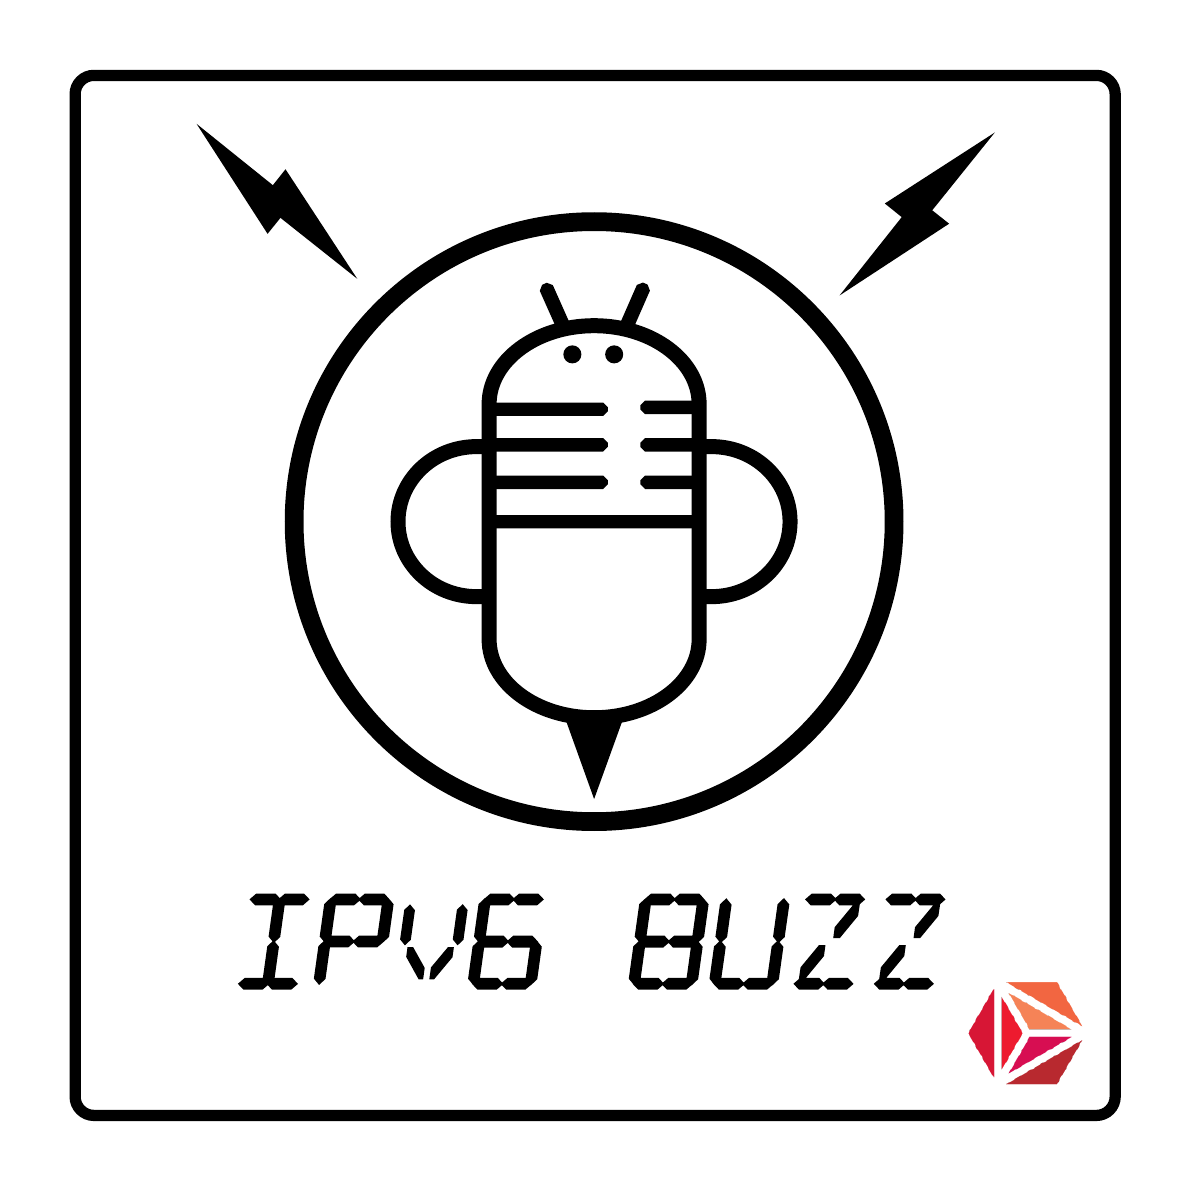 IPv6 Buzz Logo - Use This One As Of June 2020